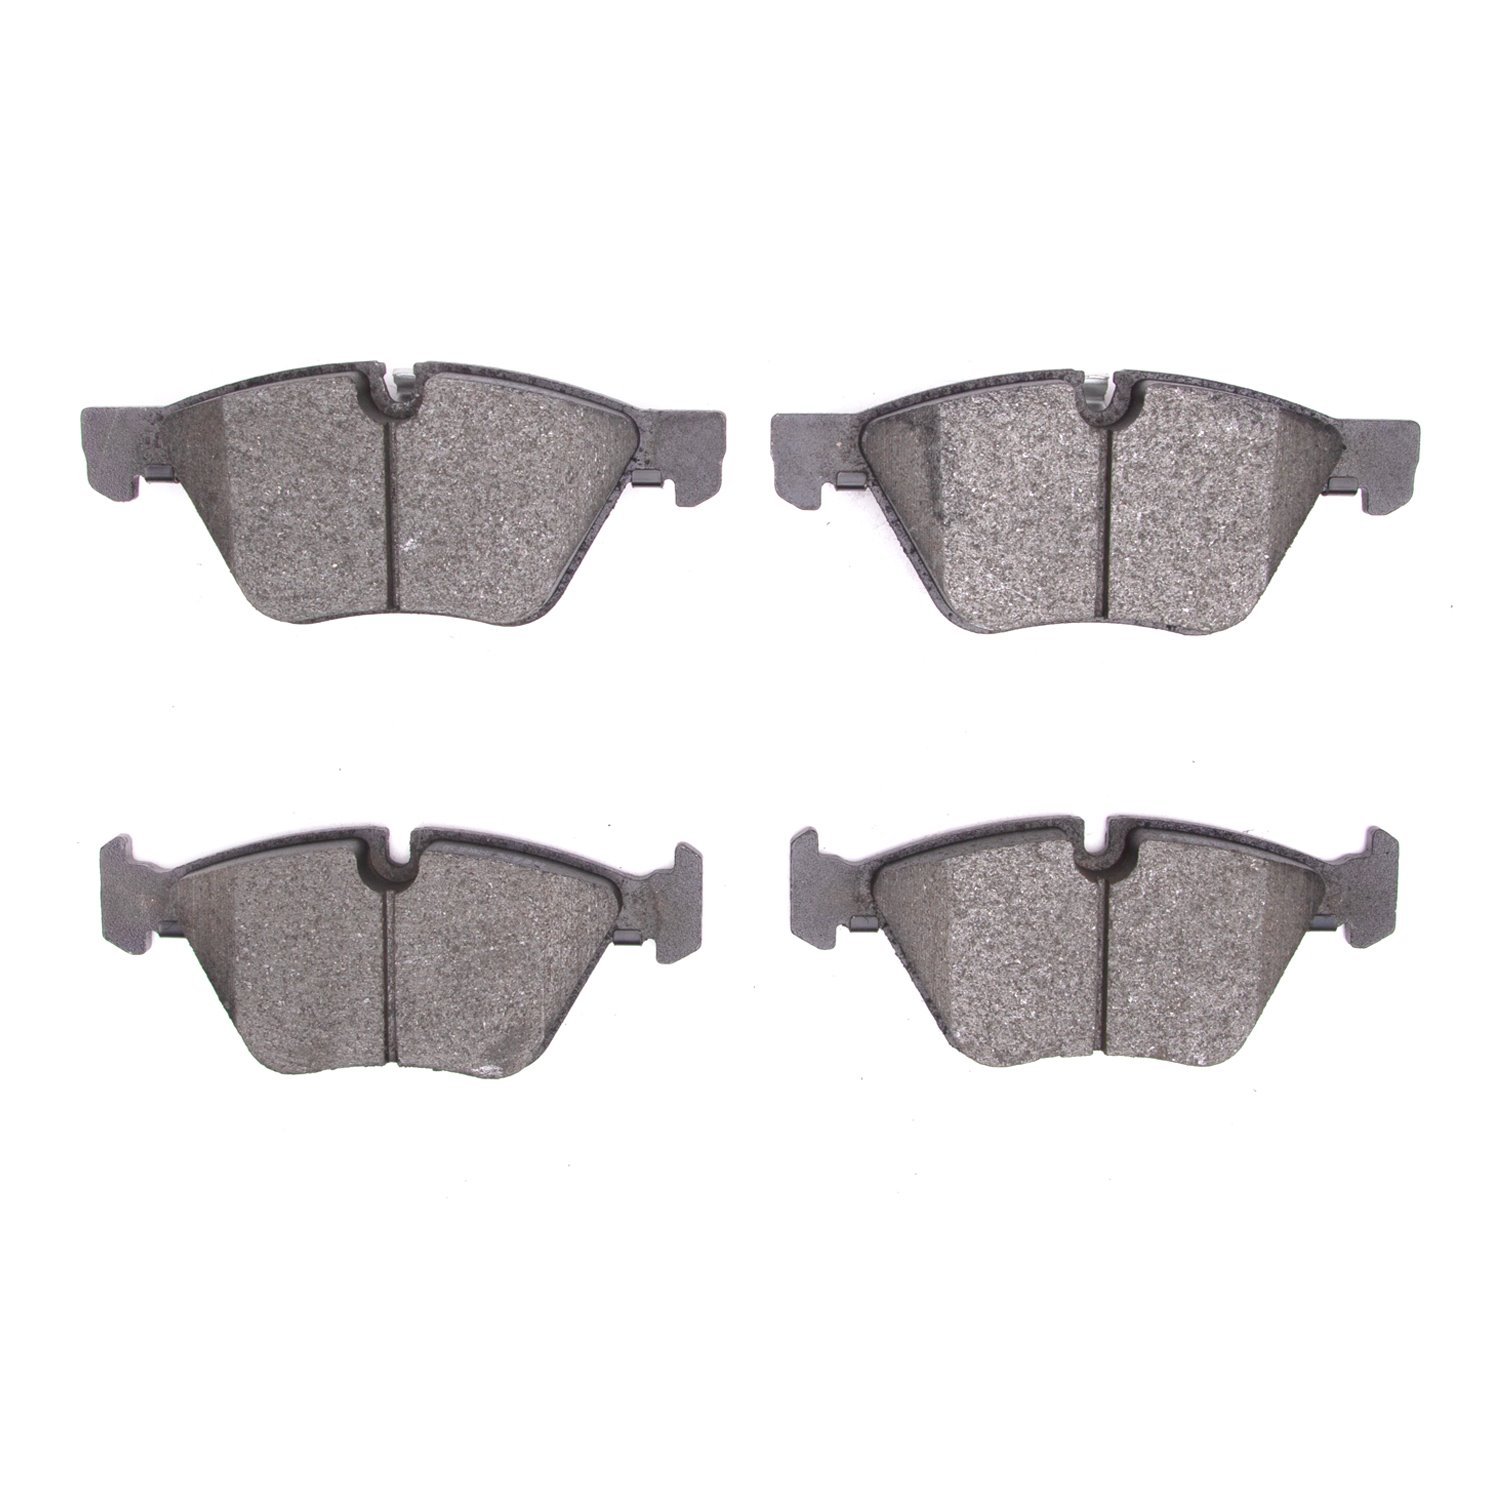 1551-1061-00 5000 Advanced Ceramic Brake Pads, Fits Select BMW, Position: Front